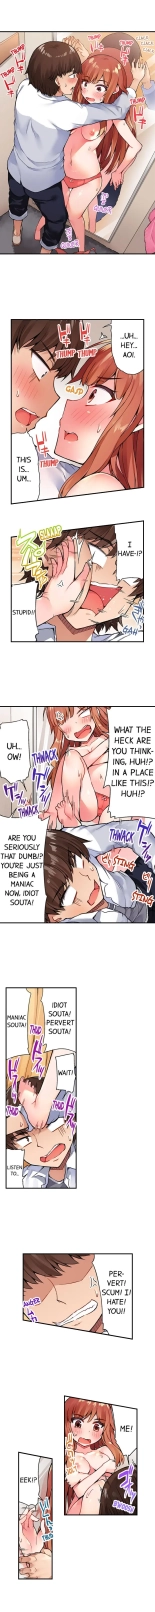 Traditional Job of Washing Girls' Body Ch. 1-181 : page 212